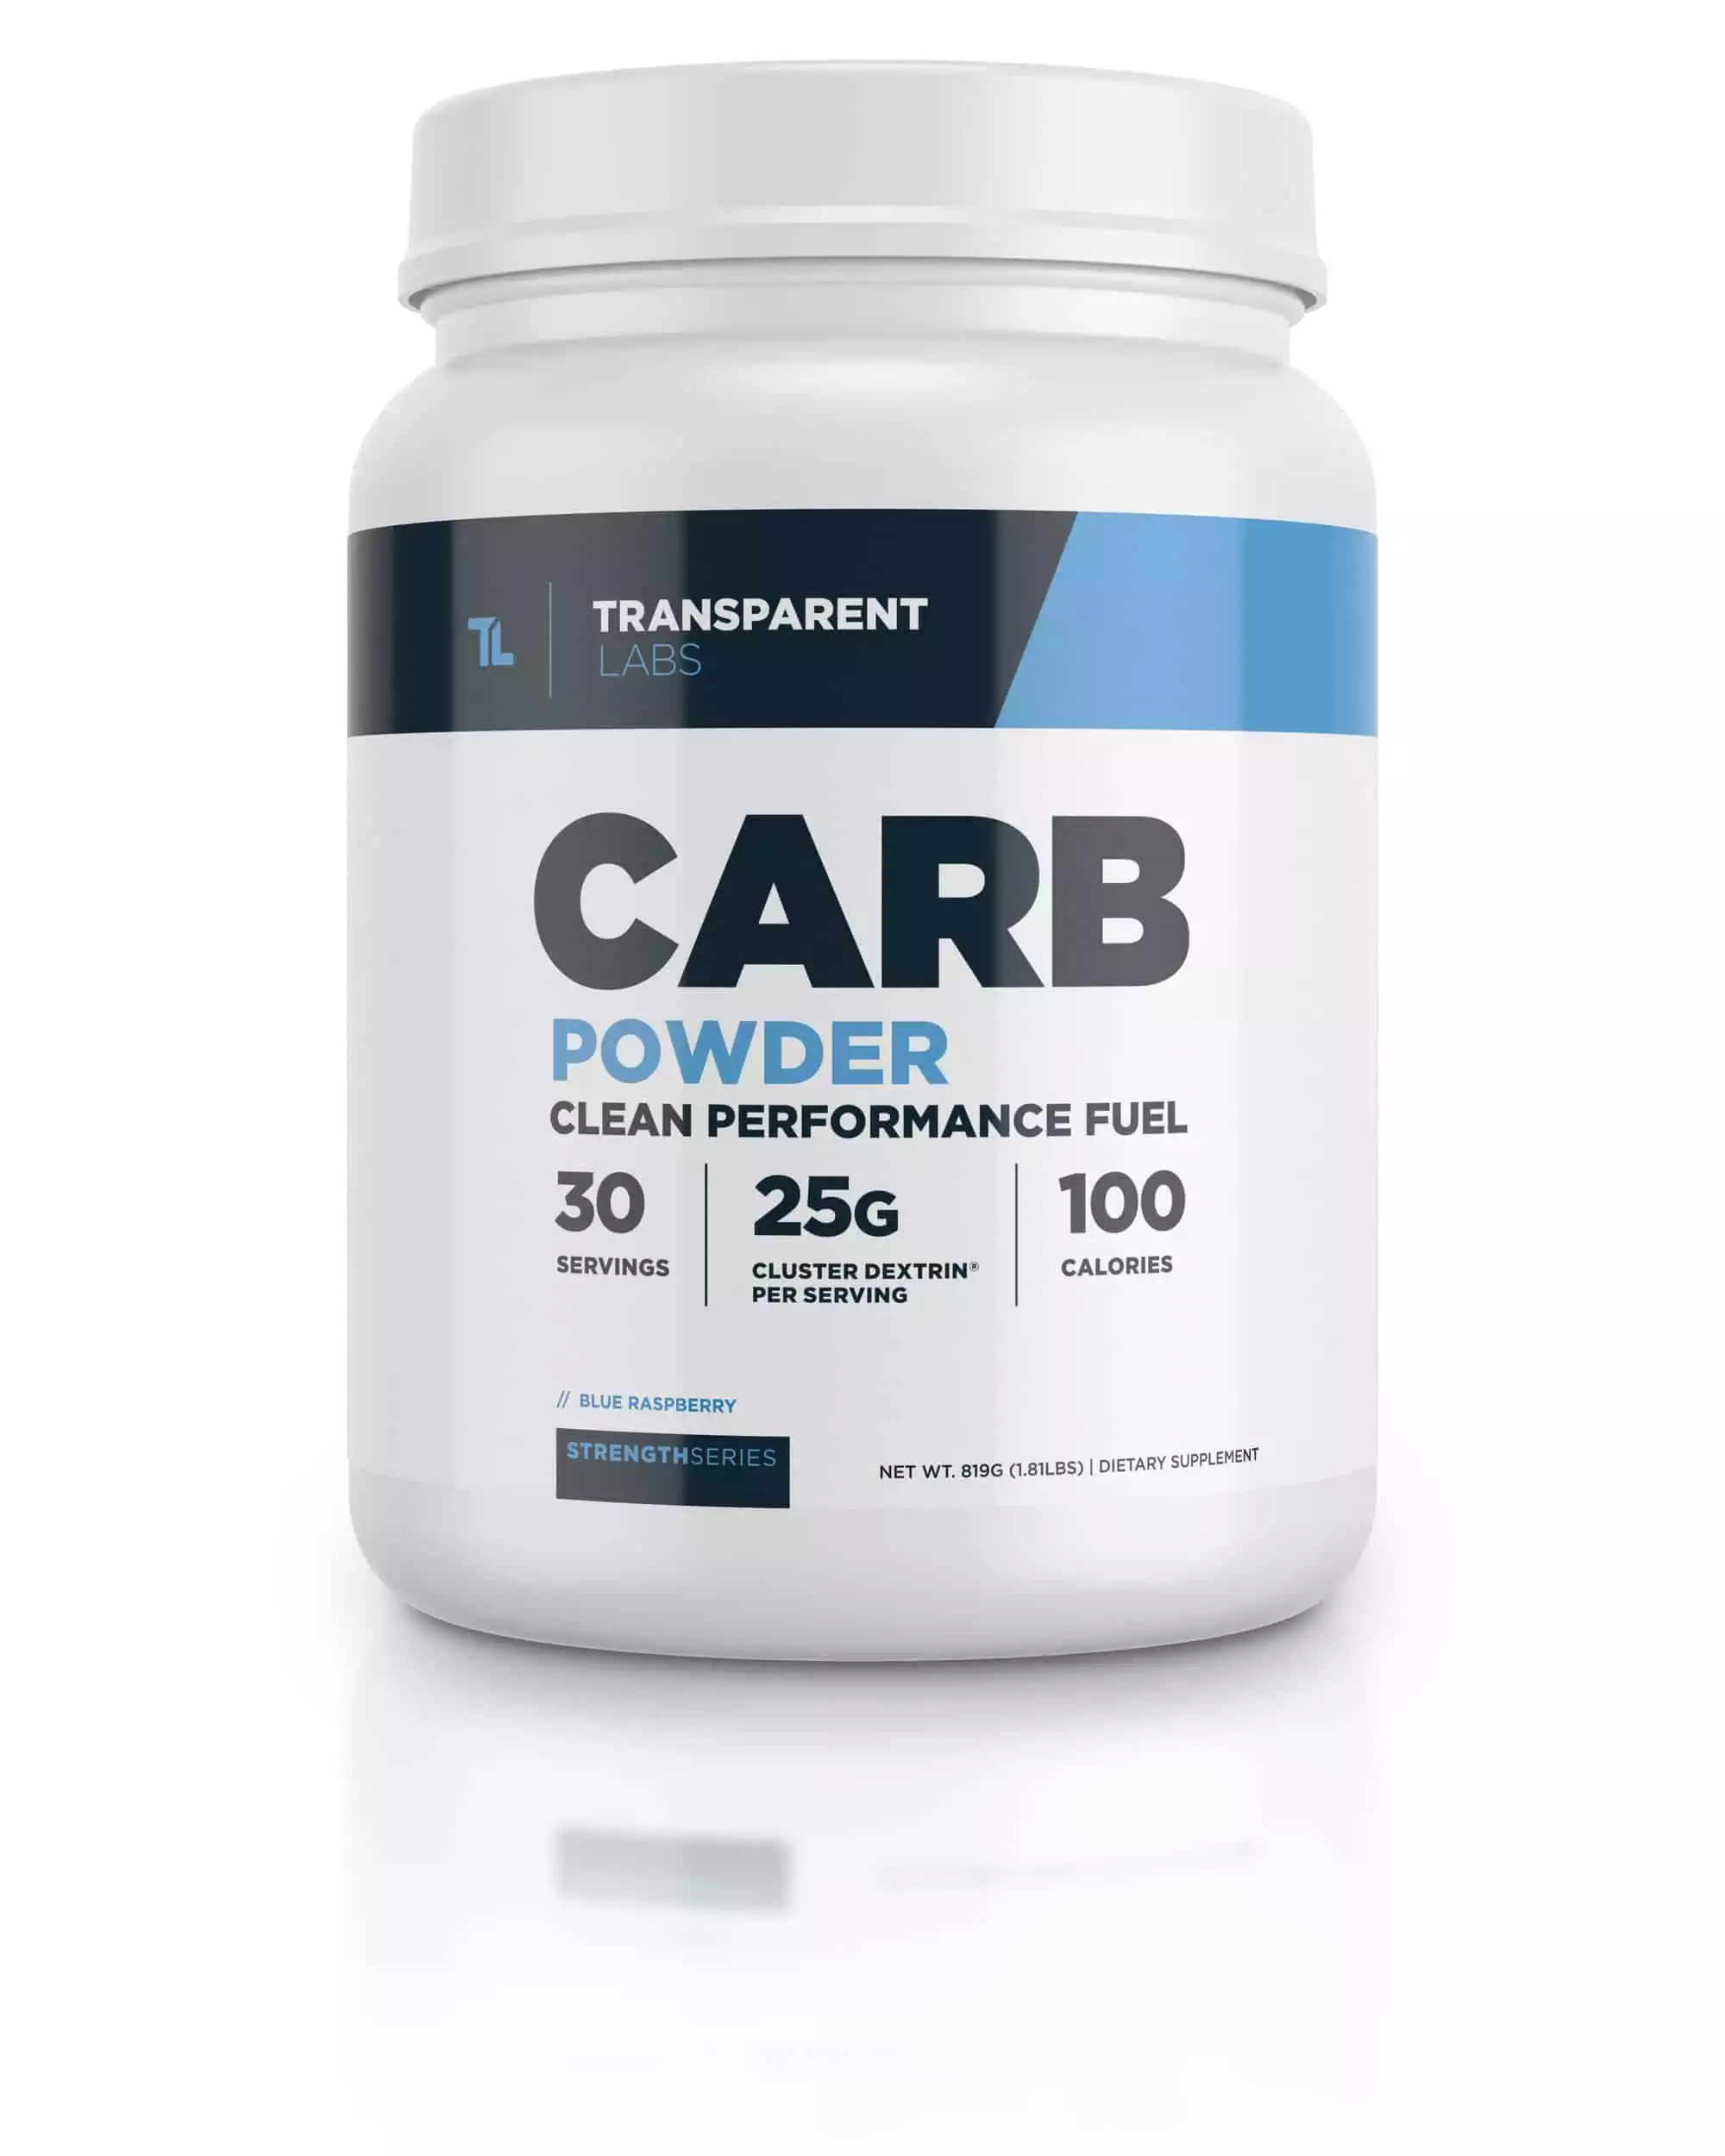 Transparent Labs Carb Powder with Cluster Dextrin (30 Servings)